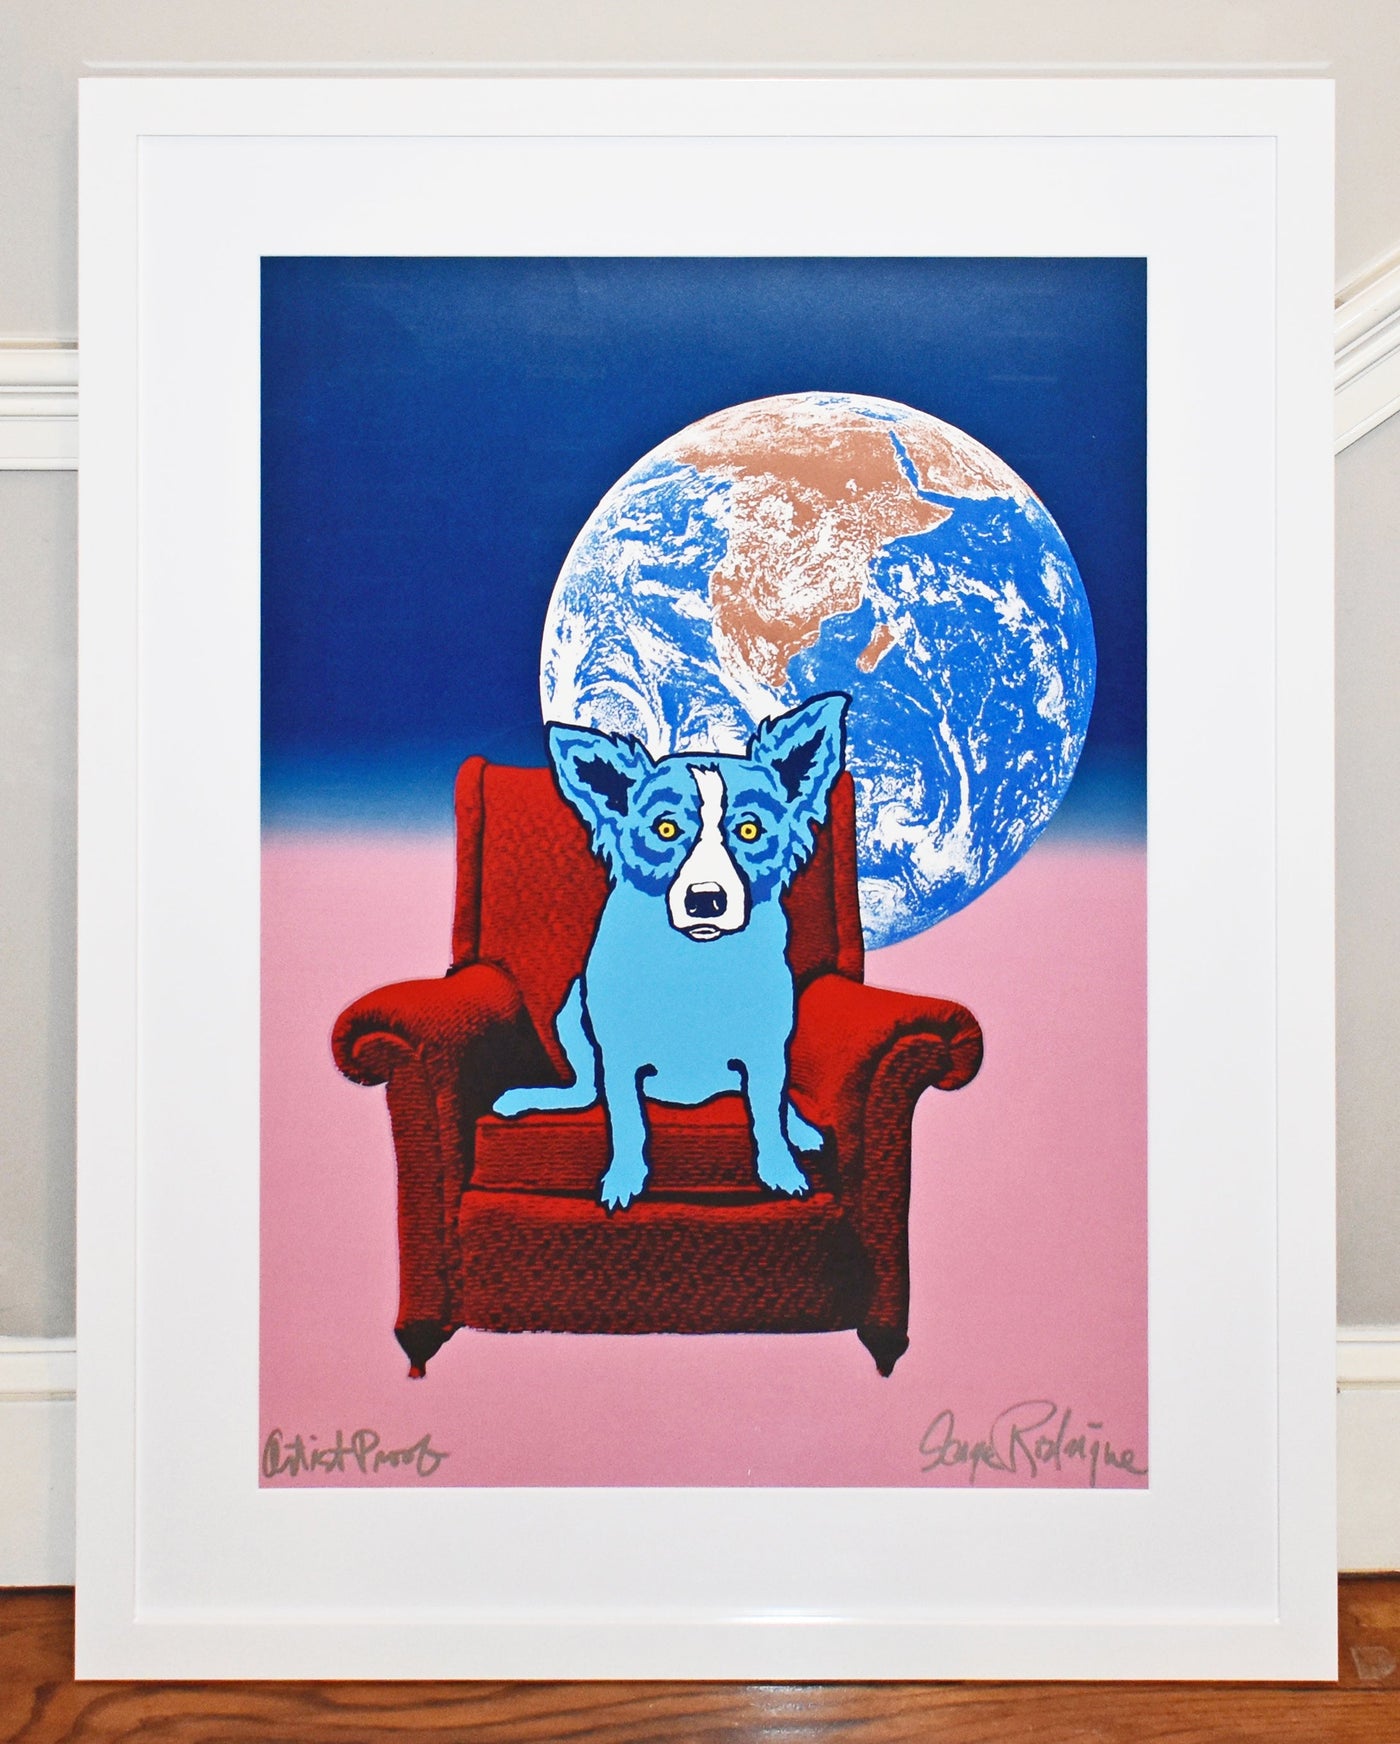 George Rodrigue Space Chair: Split-font Blue and Pink (Homer p 60) 1992